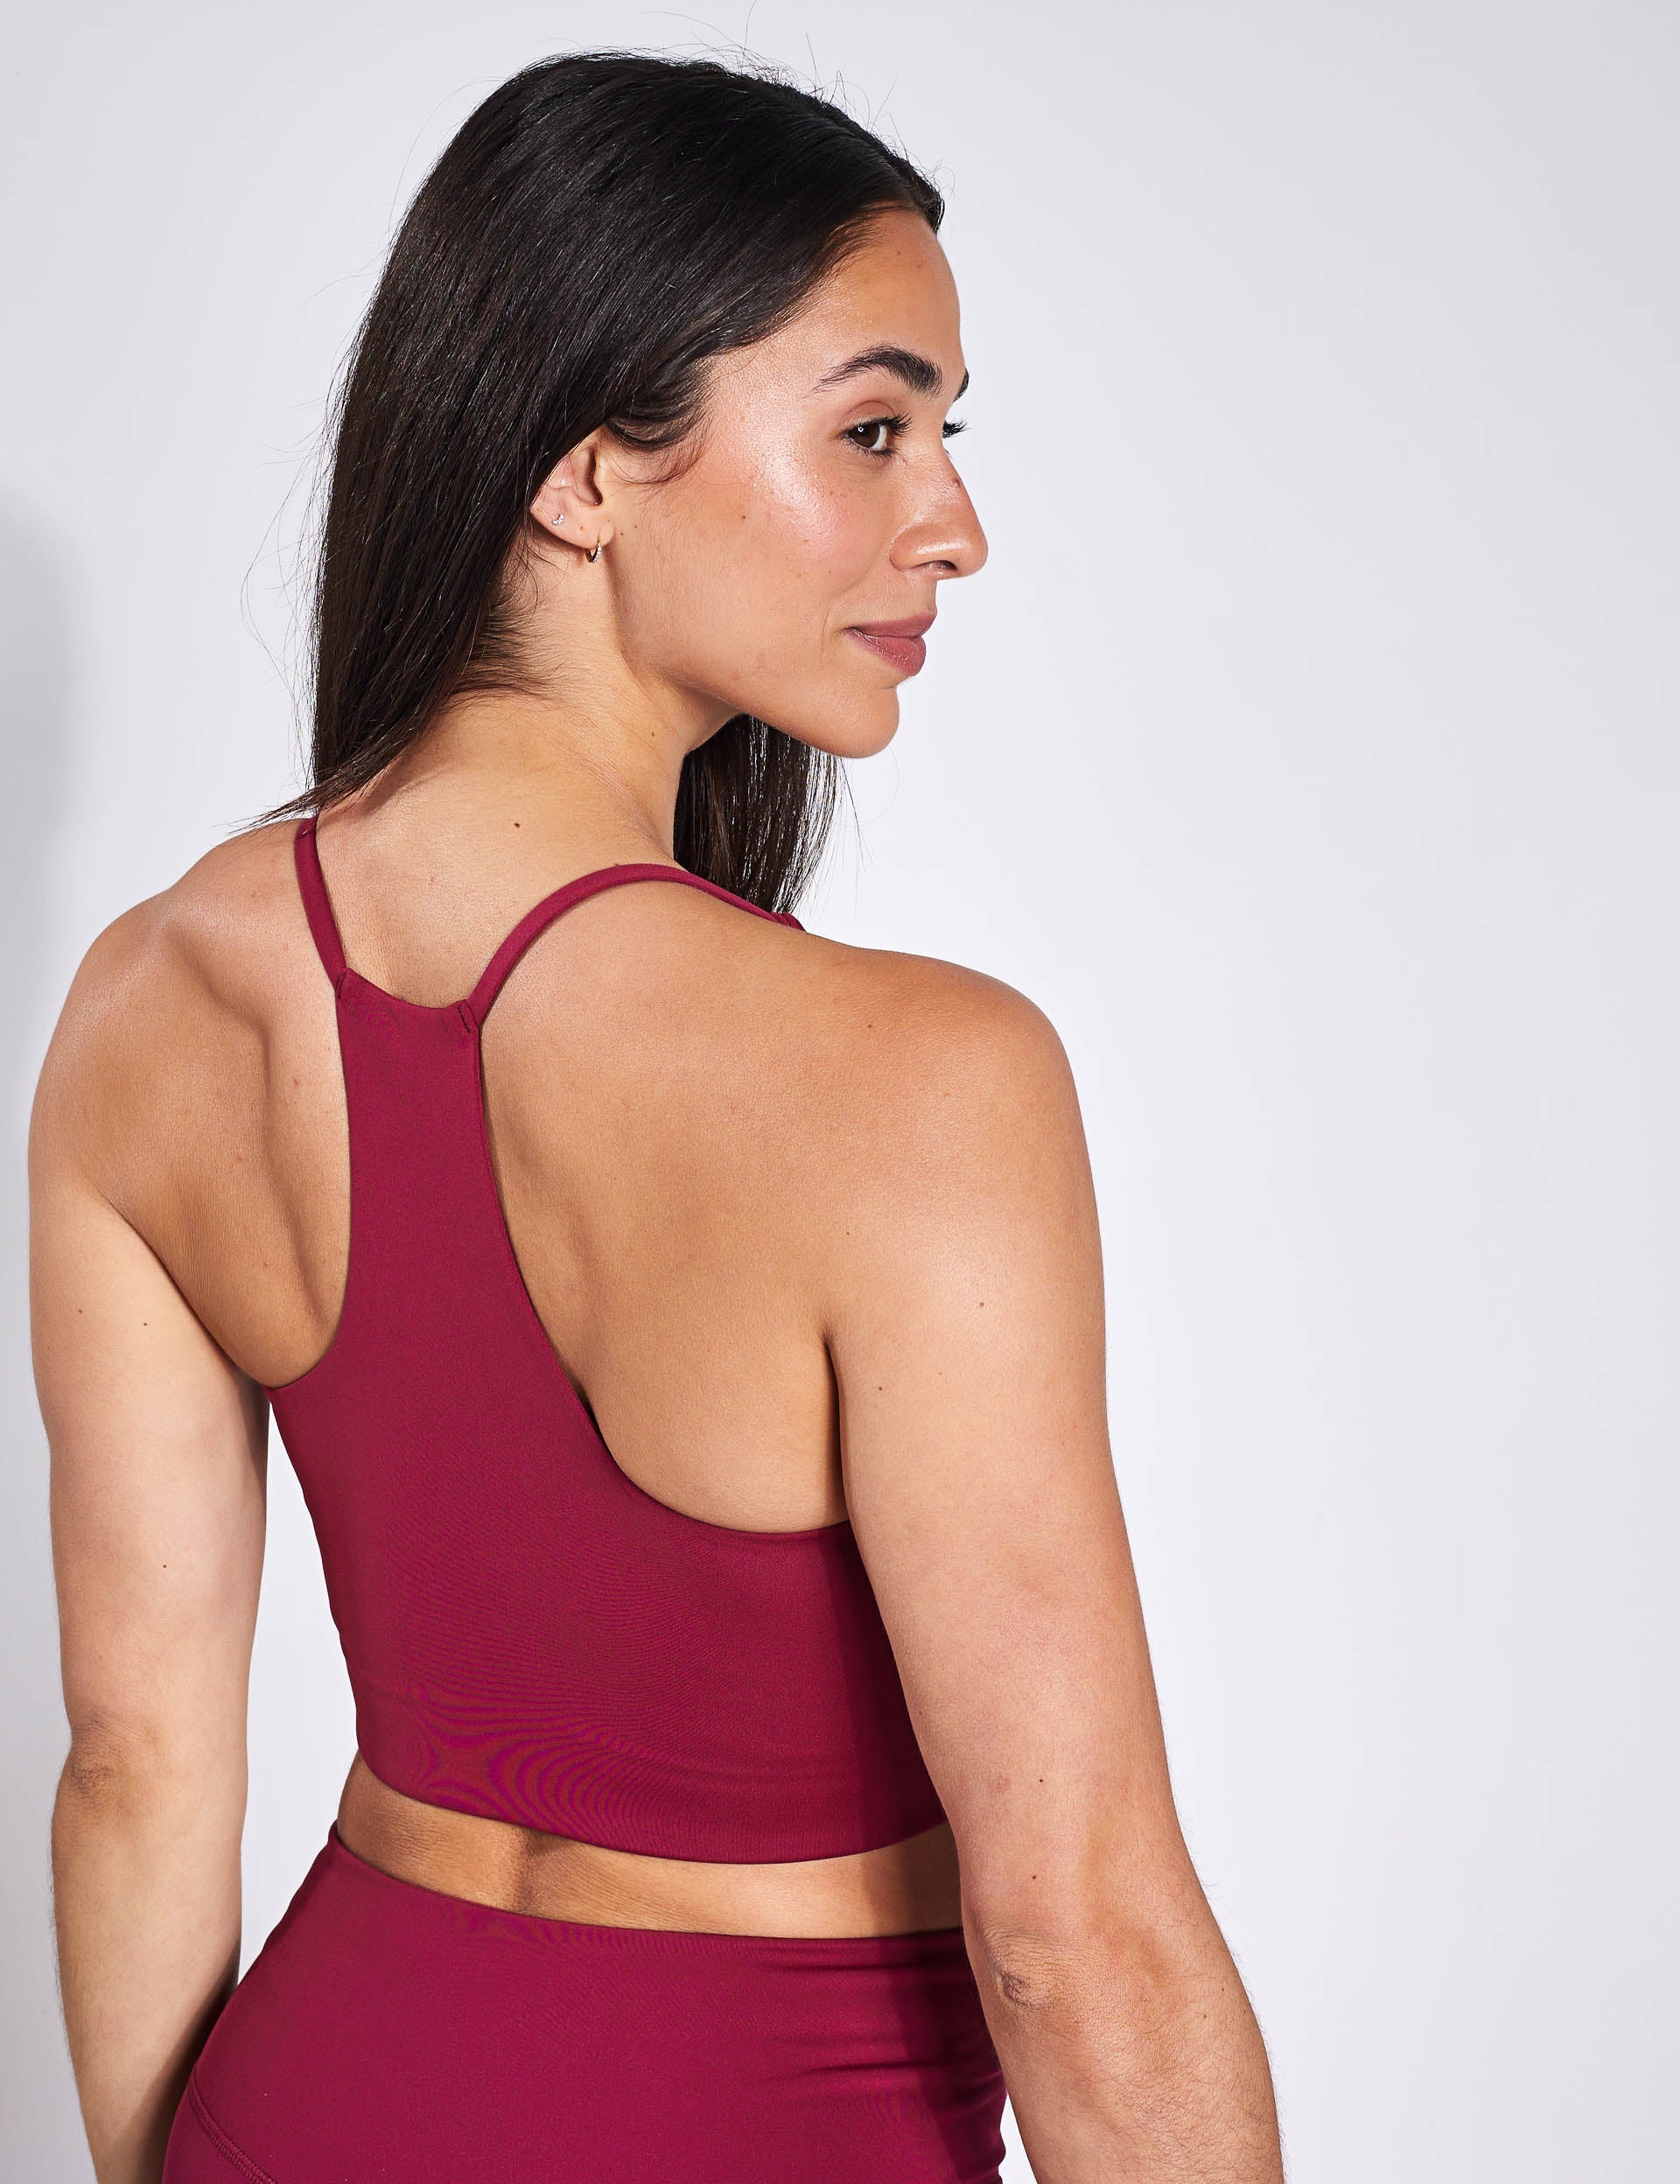 Girlfriend Collective Float Cleo Sports Bra - Women's - Clothing